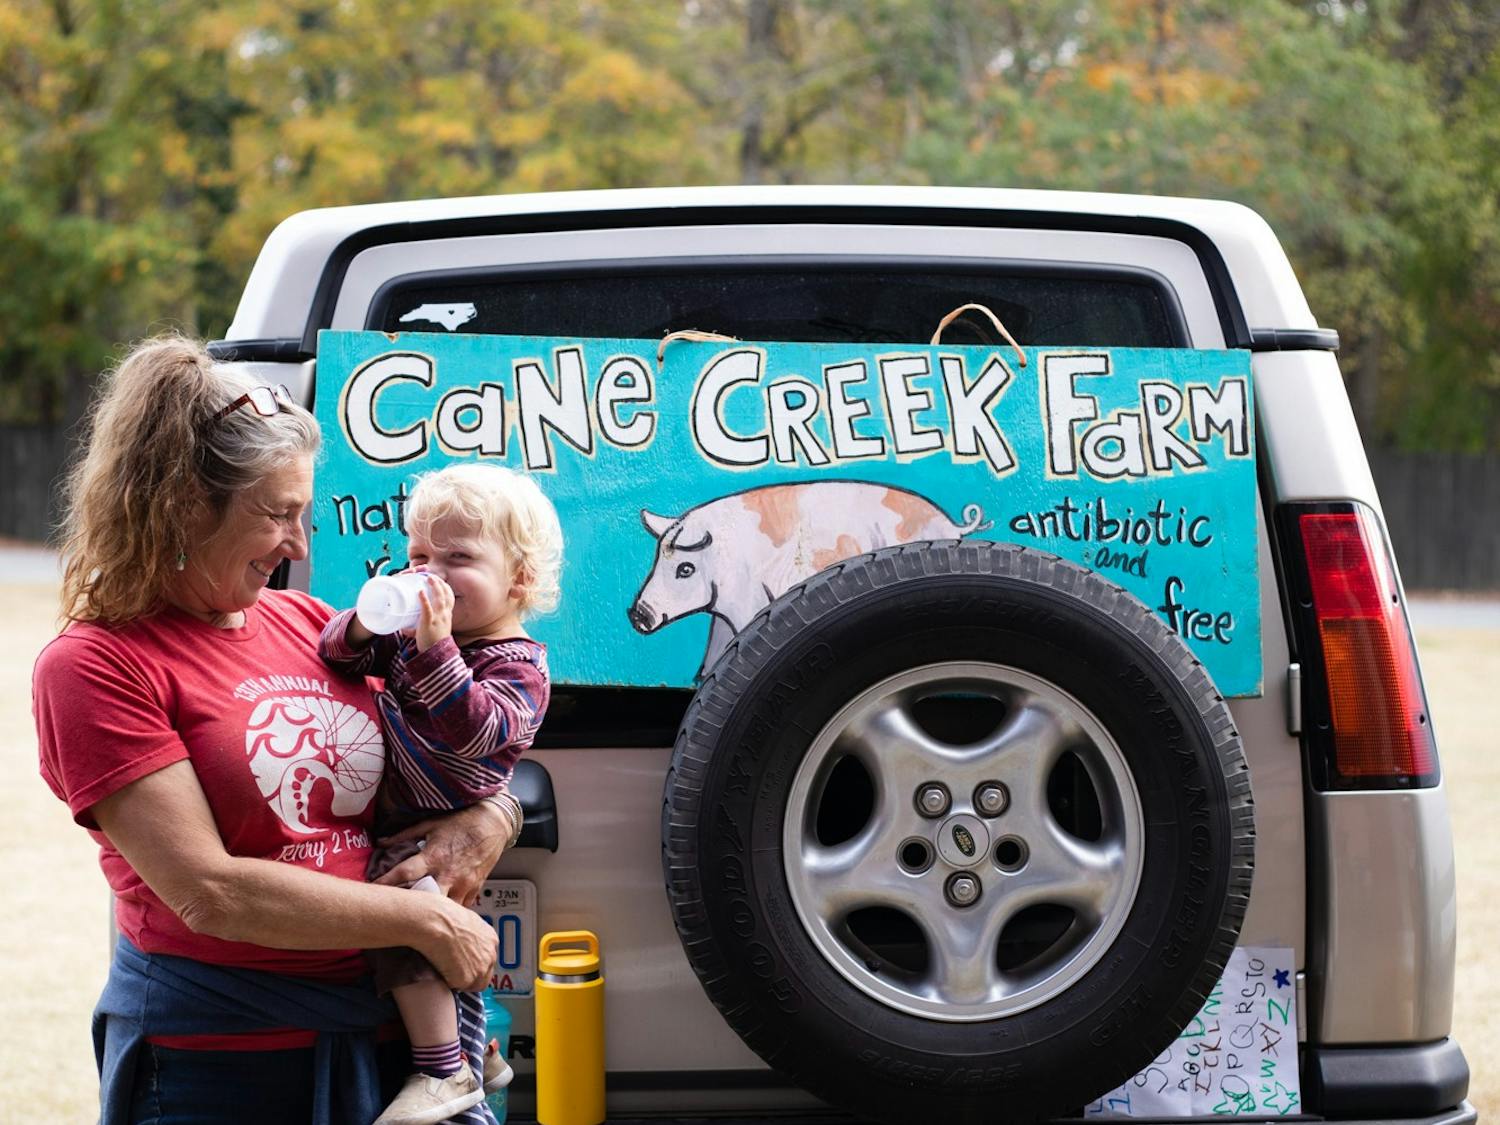 Eliza Maclean, owner of Cane Creek Farm, stands with Watt Basnight, 1, whom she co-parents, at the Carrboro Farmer's Market on Wednesday, Oct. 26, 2022.